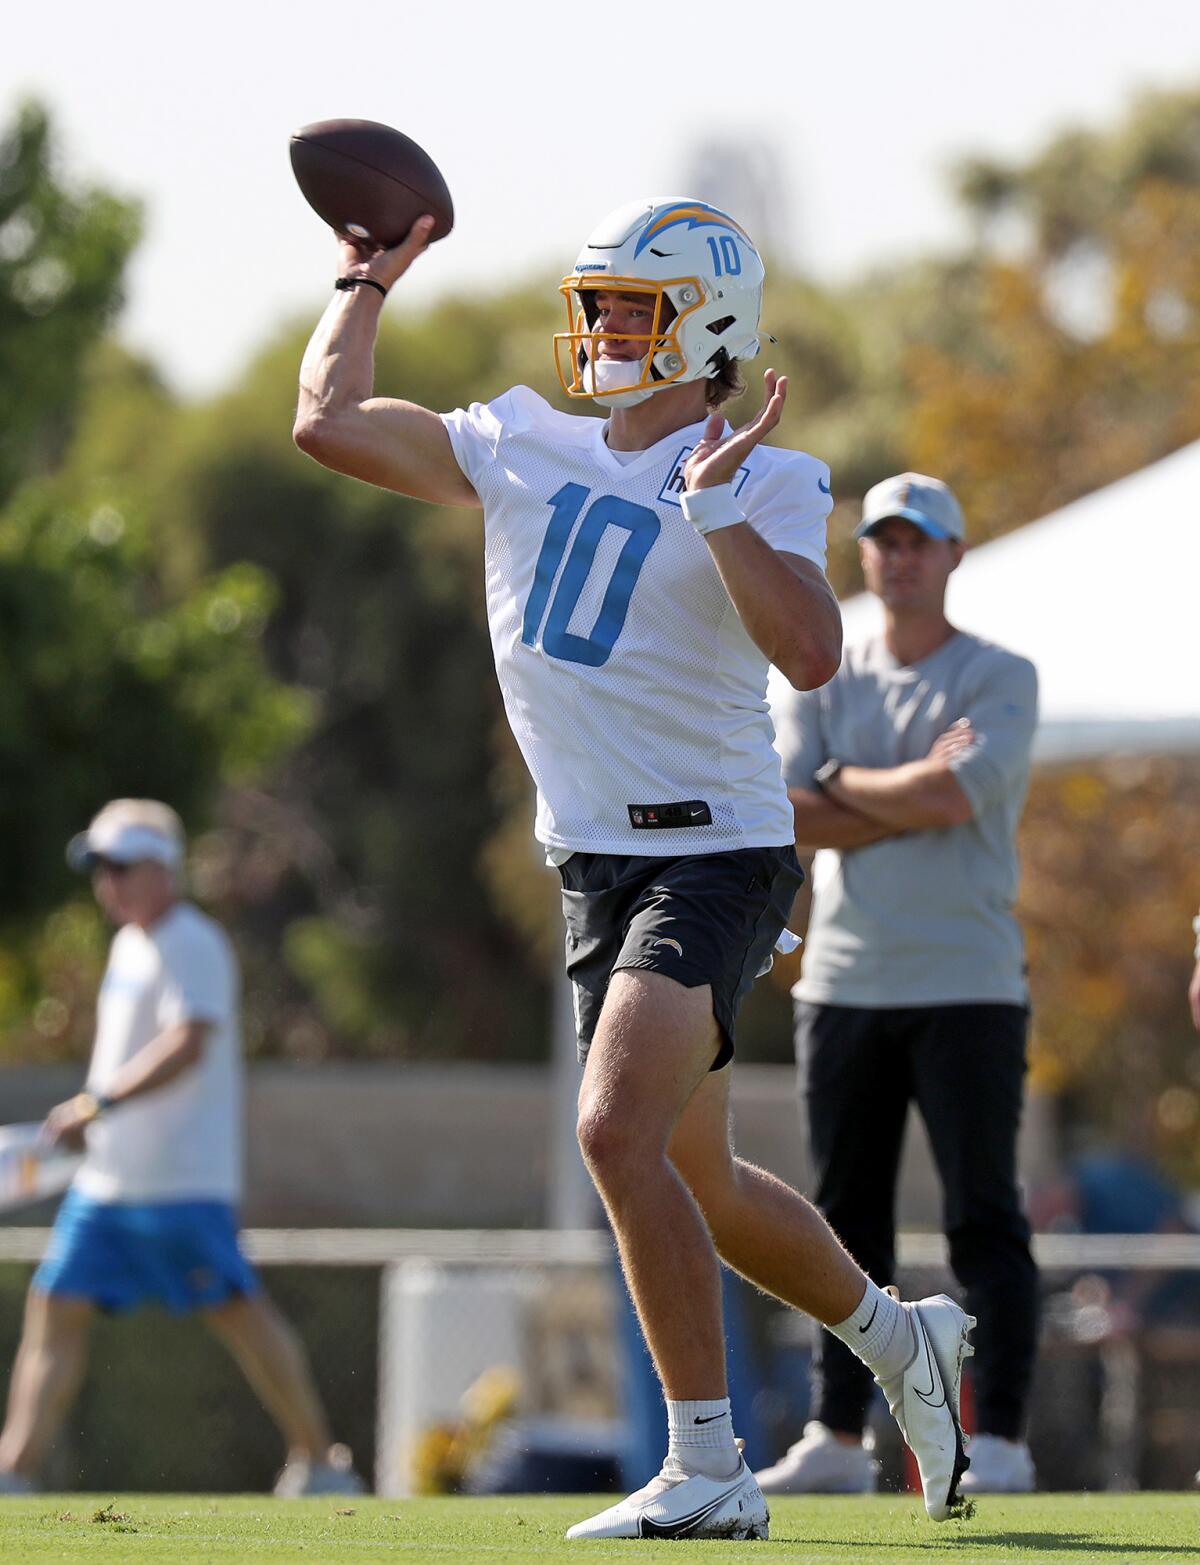 Quarterback Justin Herbert throws the ball during Chargers training camp on Wednesday at Jack Hammett Sports Complex.